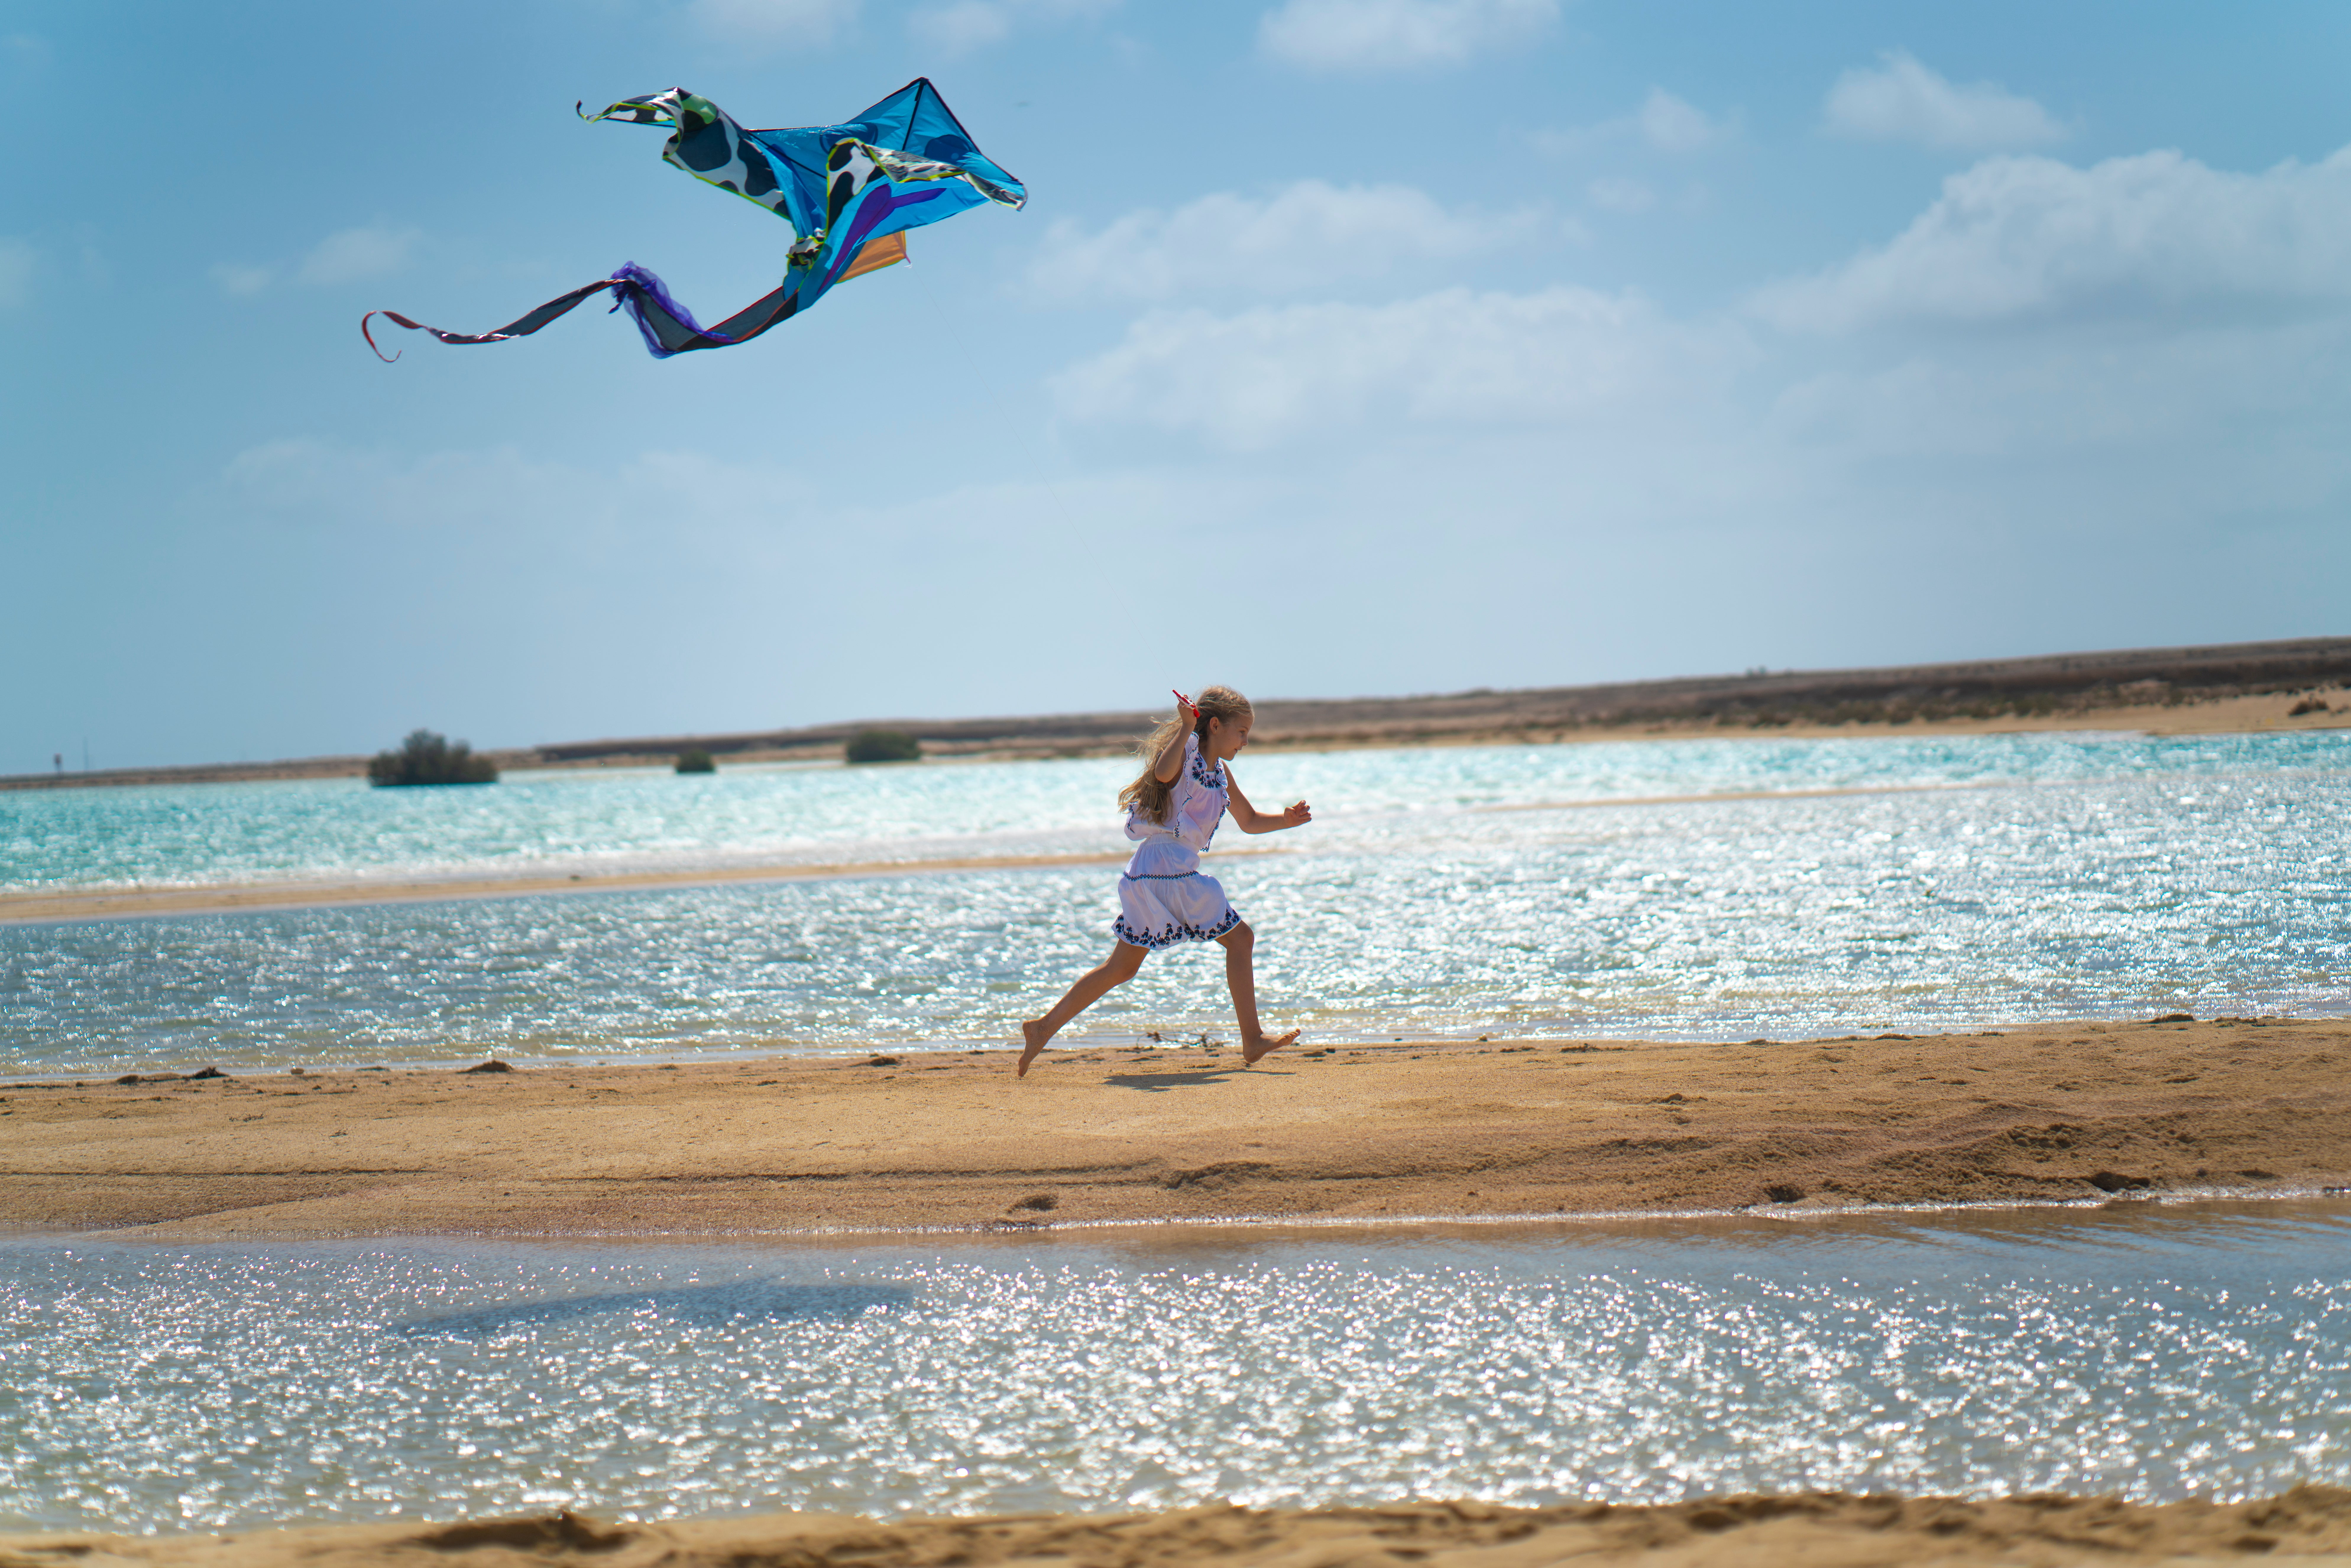 Enjoy golden sands and turquoise waters on one of Saudi’s many stunning beaches